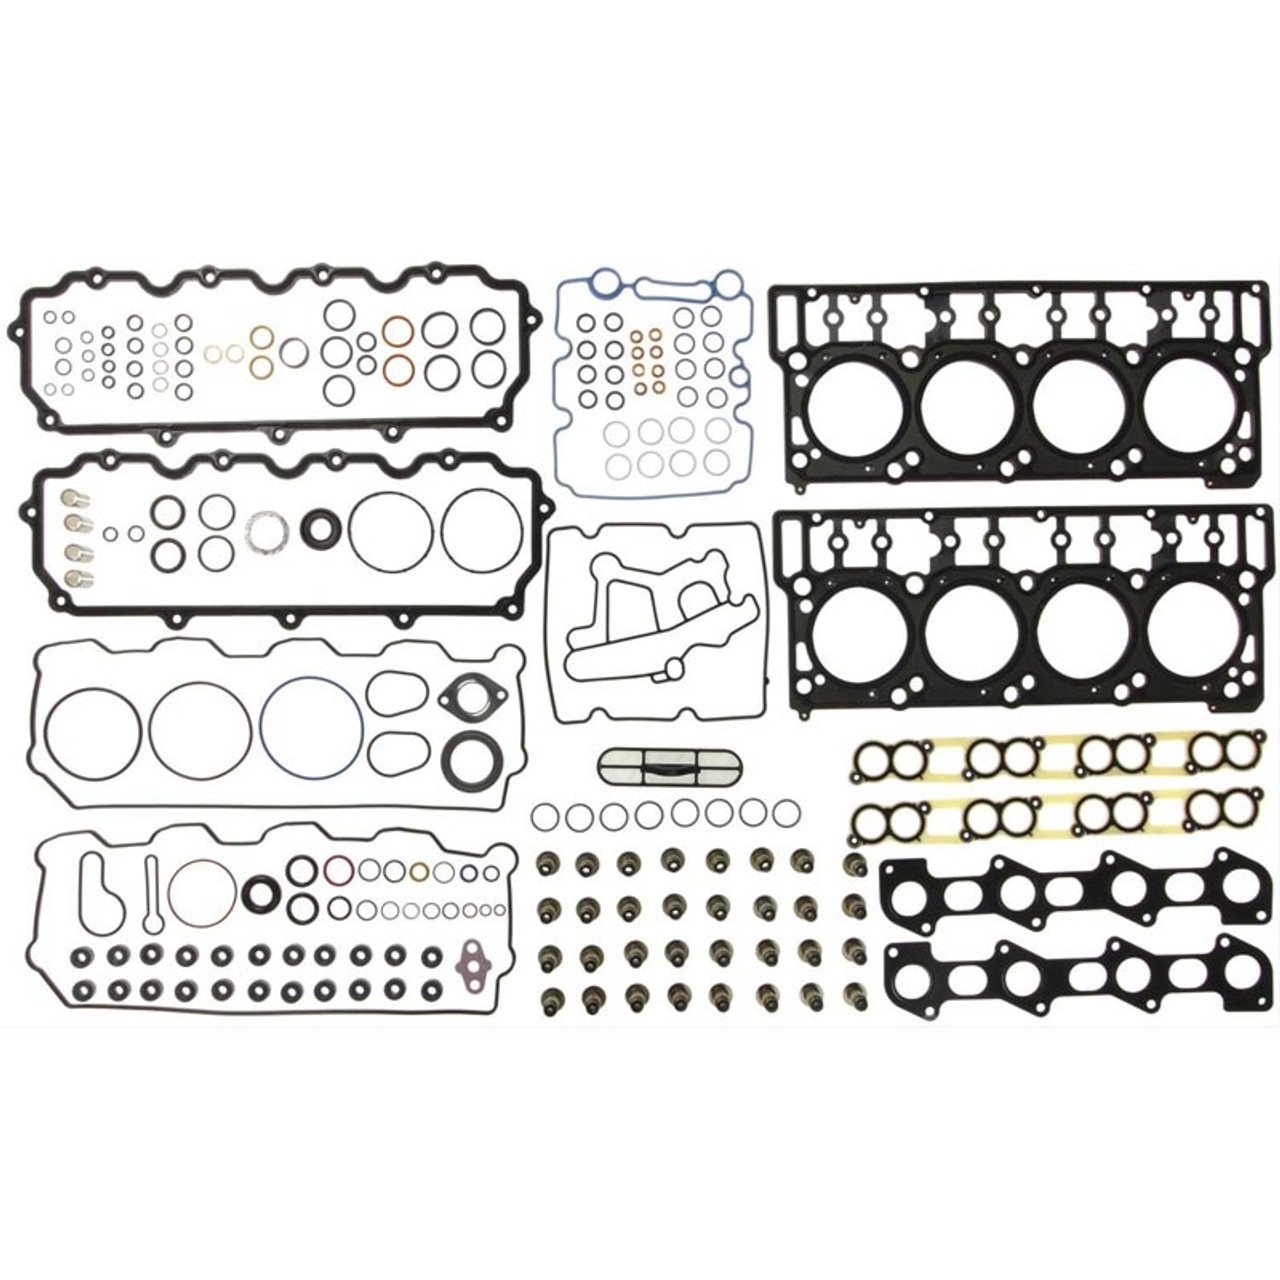 Mahle Cylinder Head Gasket Set (18MM) 2003 to 2006 6.0L Powerstroke (MCIHS54450-Main View